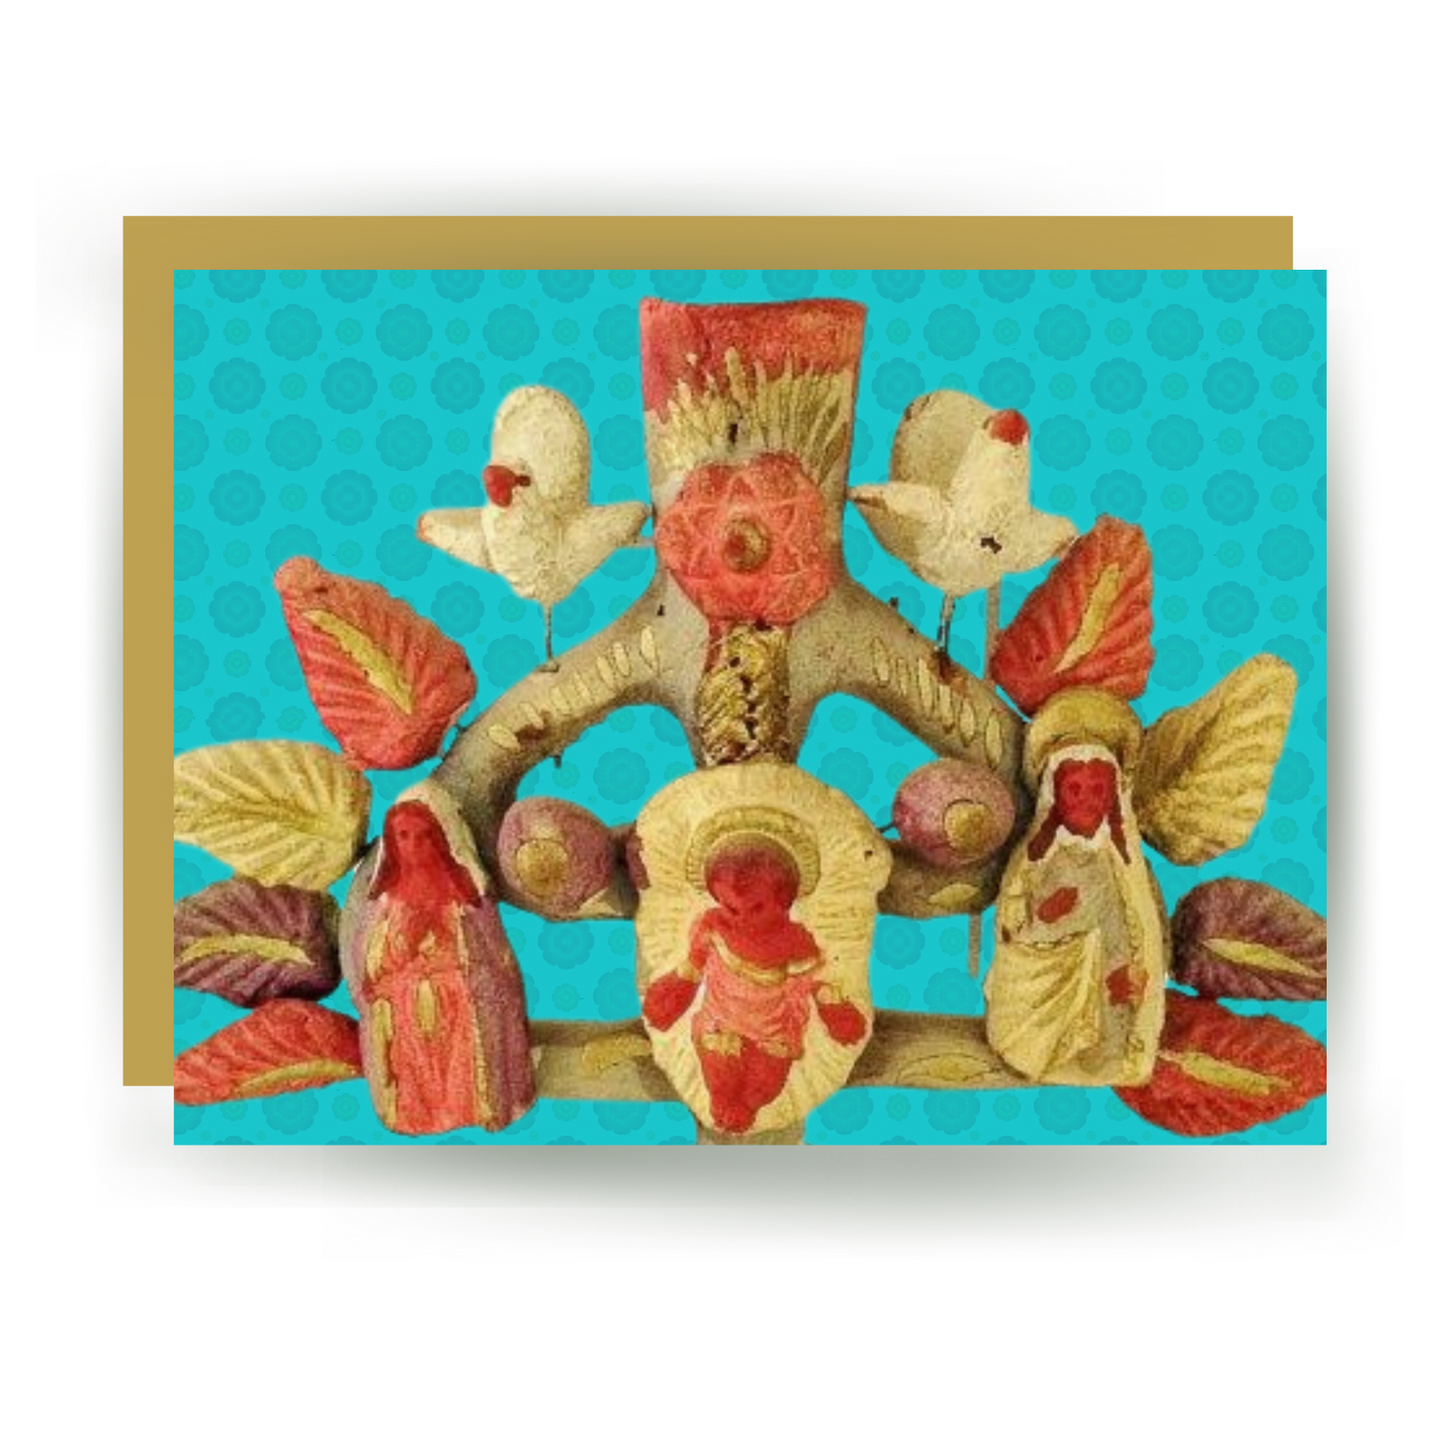 NF H 06 / Turquoise Creche Candelera Greeting Card